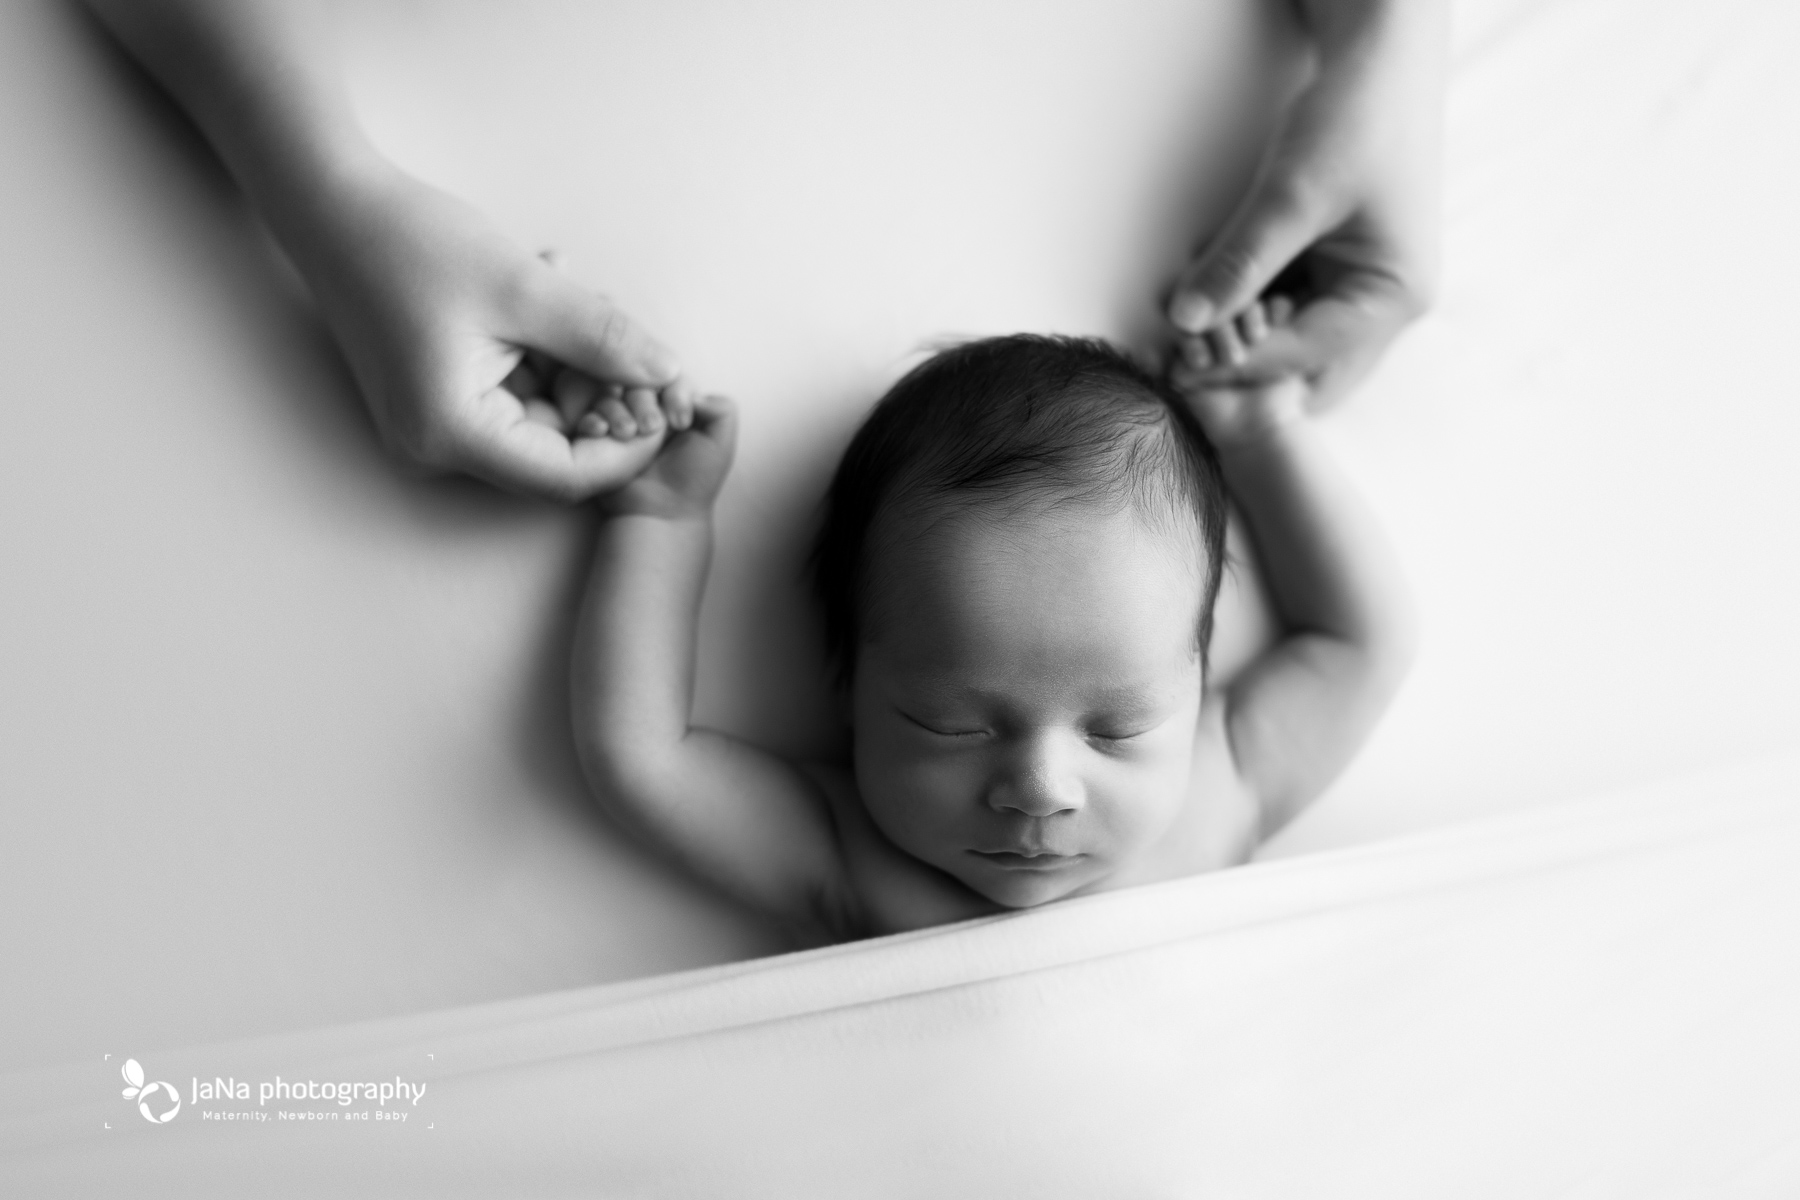  Vancouver best newborn photographer-mom hand - detail - black and white